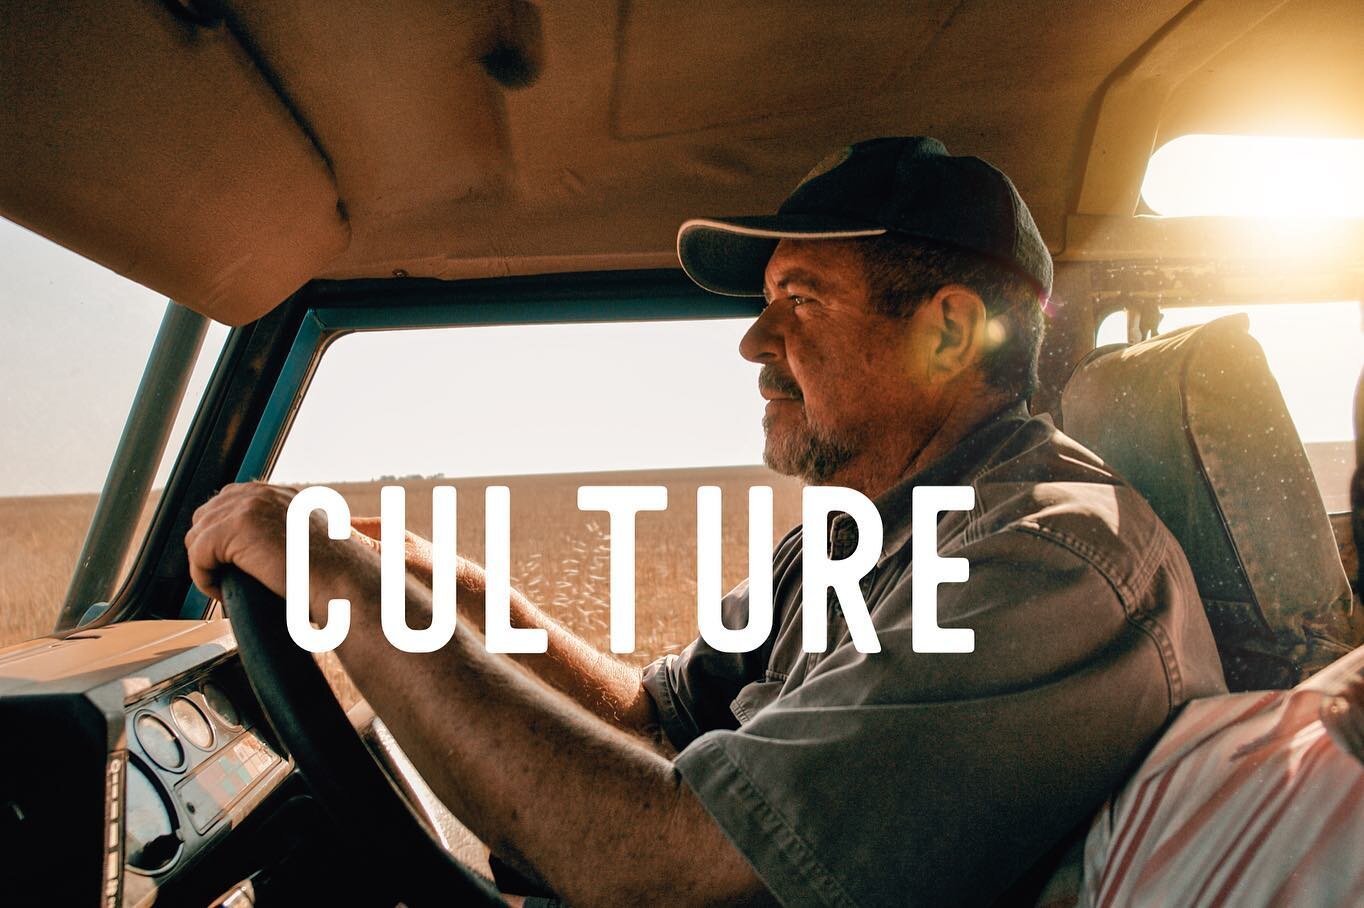 We believe culture is how we make sense of the world and make decisions.

Given better decisions lead to better outcomes, we ensure culture and strategy are deeply aligned. 

After all, culture eats strategy for breakfast (Peter Drucker).

#culture #